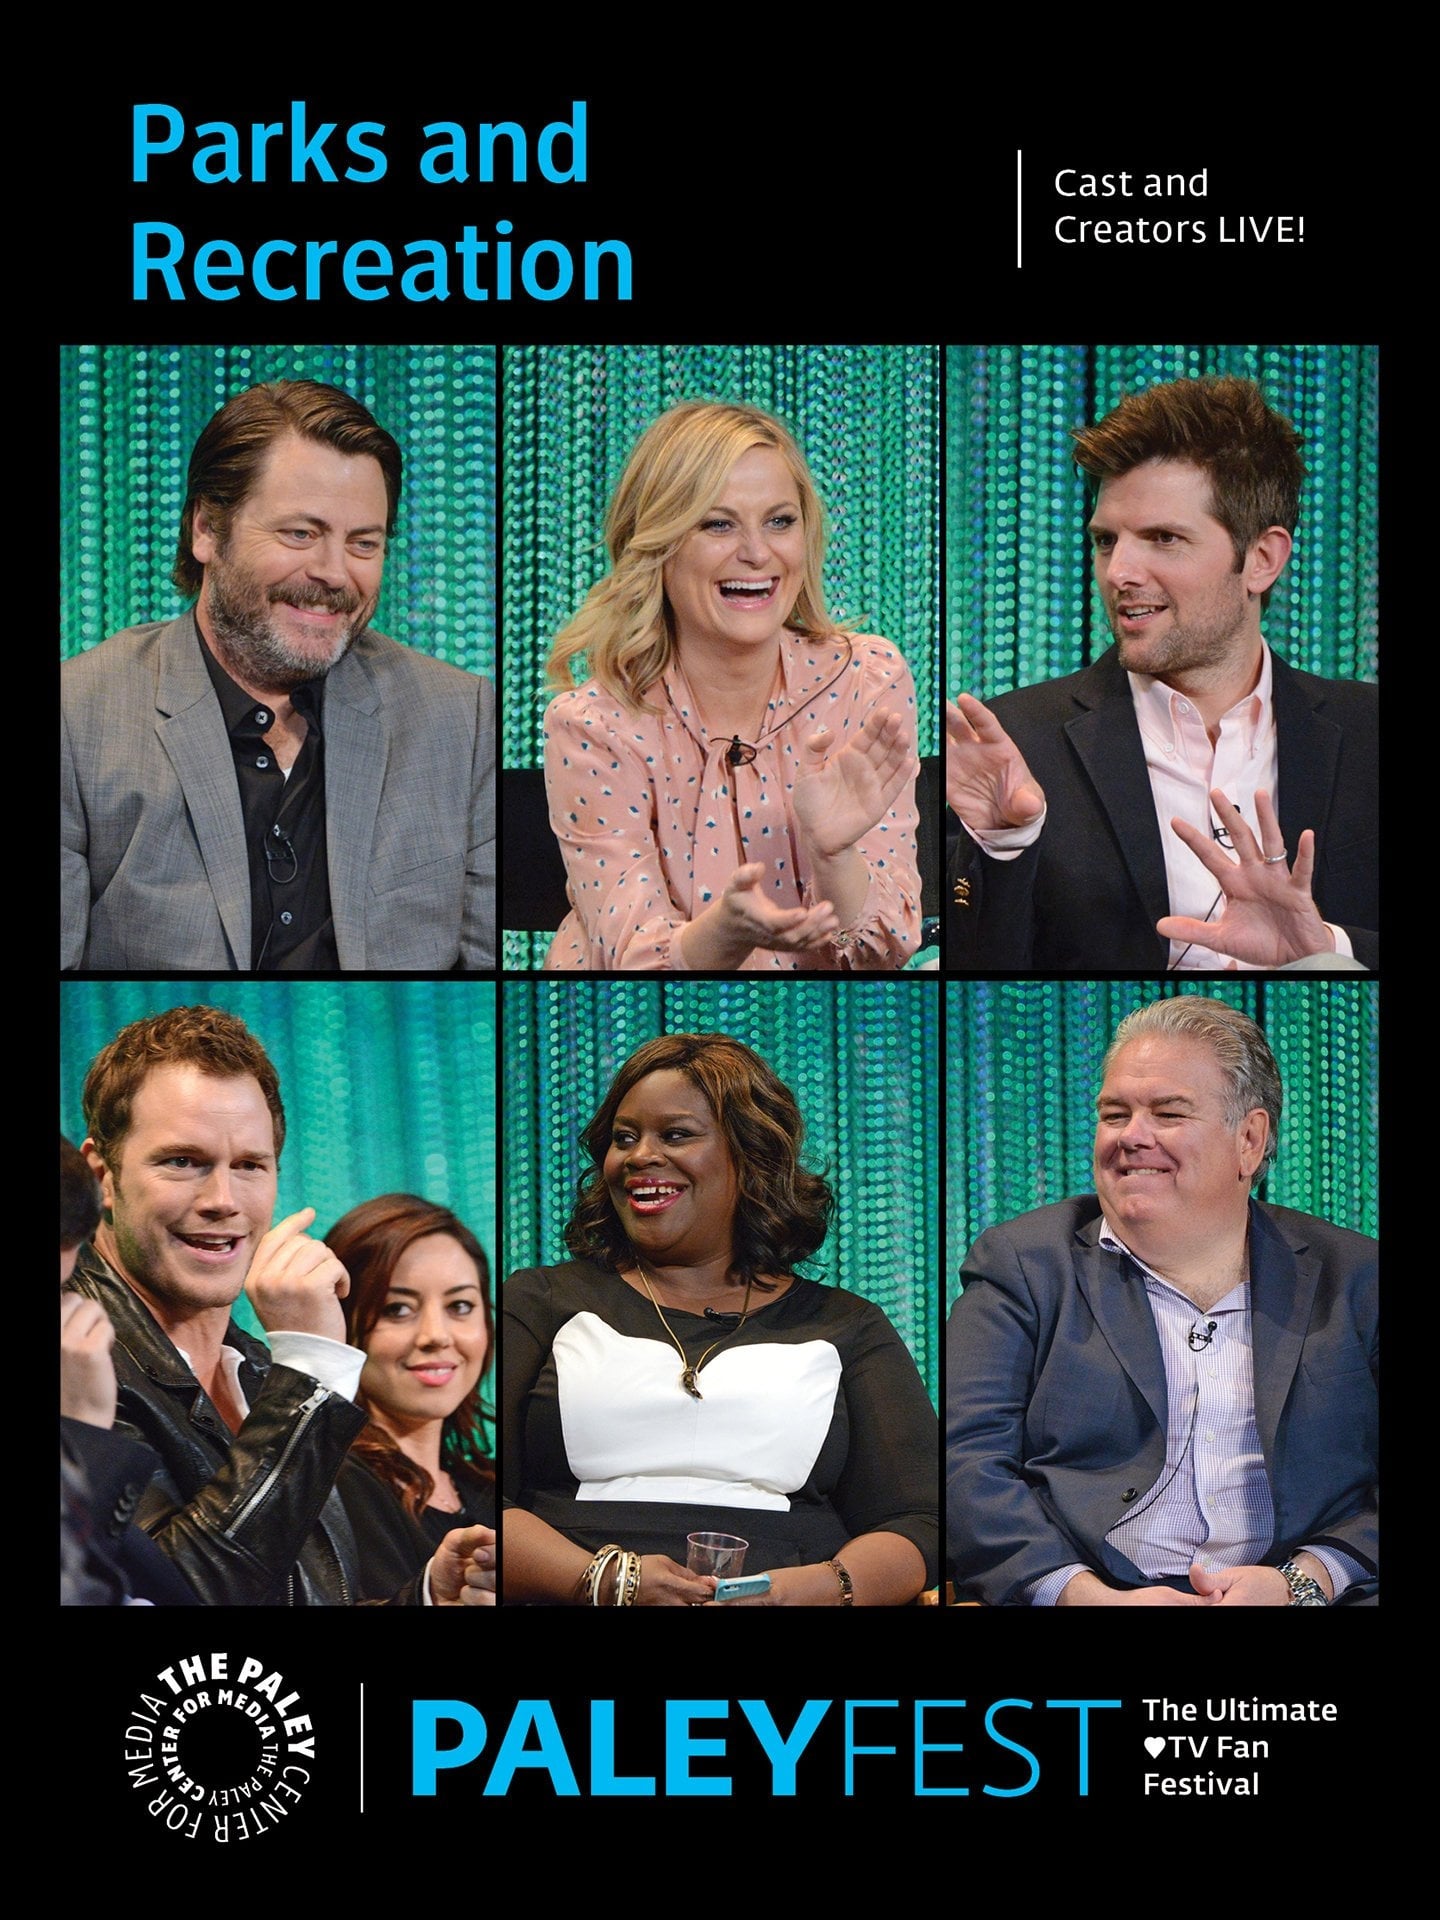 Parks and Recreation Cast and Creators Live at PALEYFEST 2014 (2014